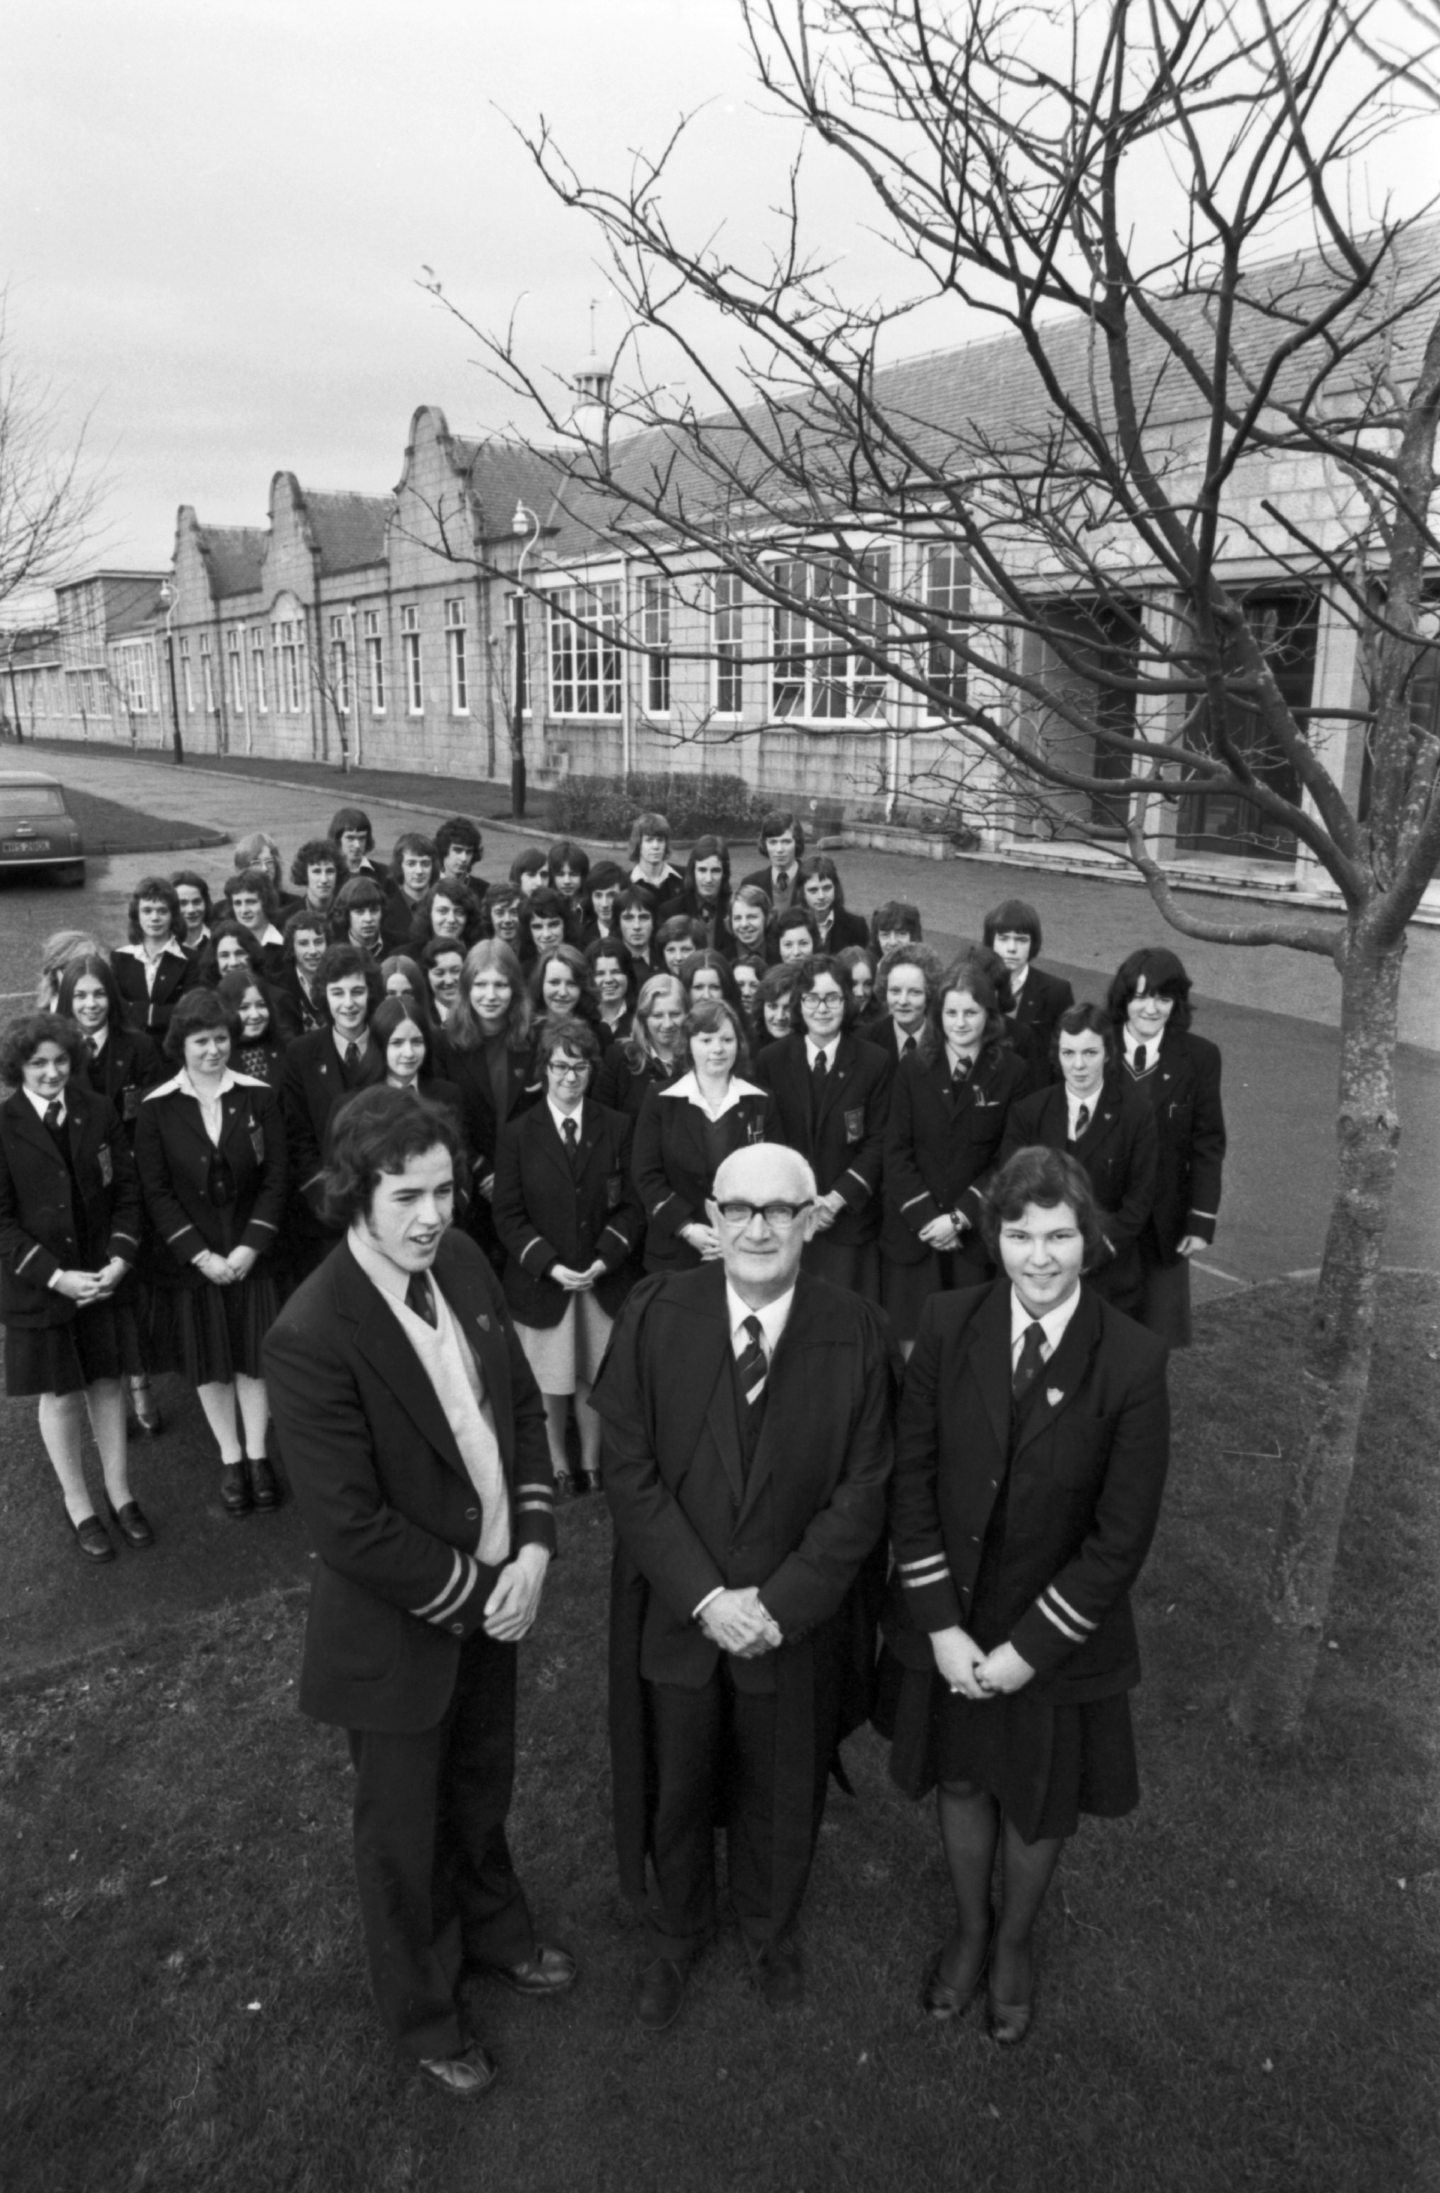 Dr Norman Dixon with the captains of the school, Graeme Reid and Morag Shiach, with prefects behind standing outside the school